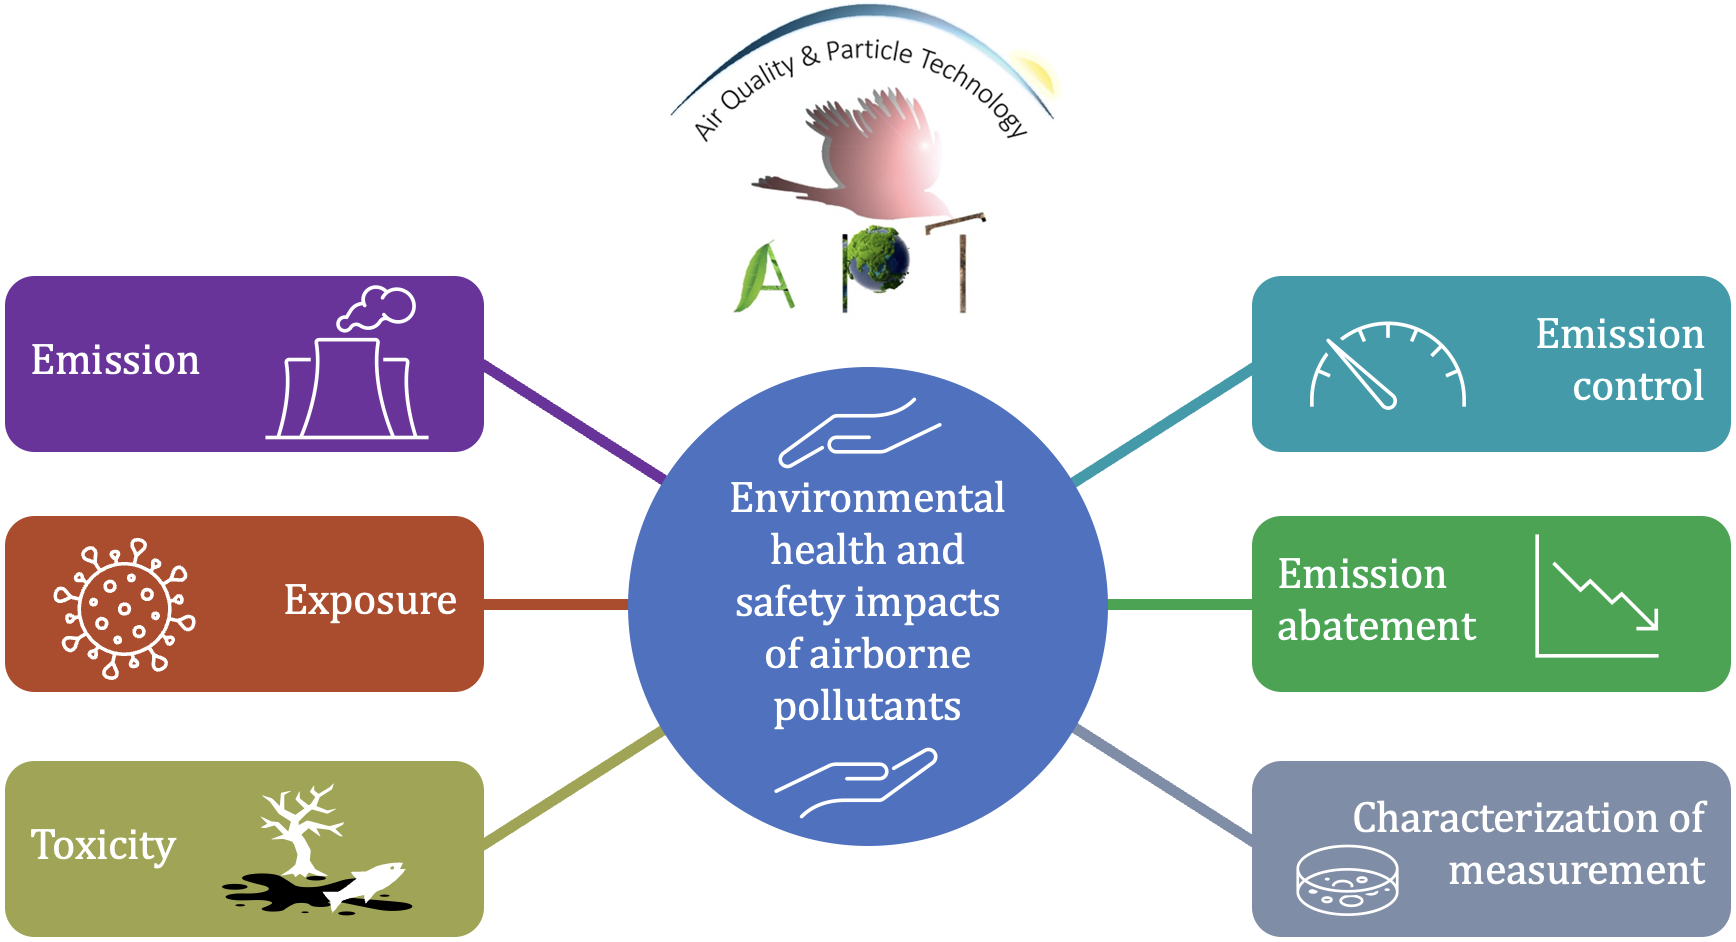 Industrial Ecology: Air Quality Control